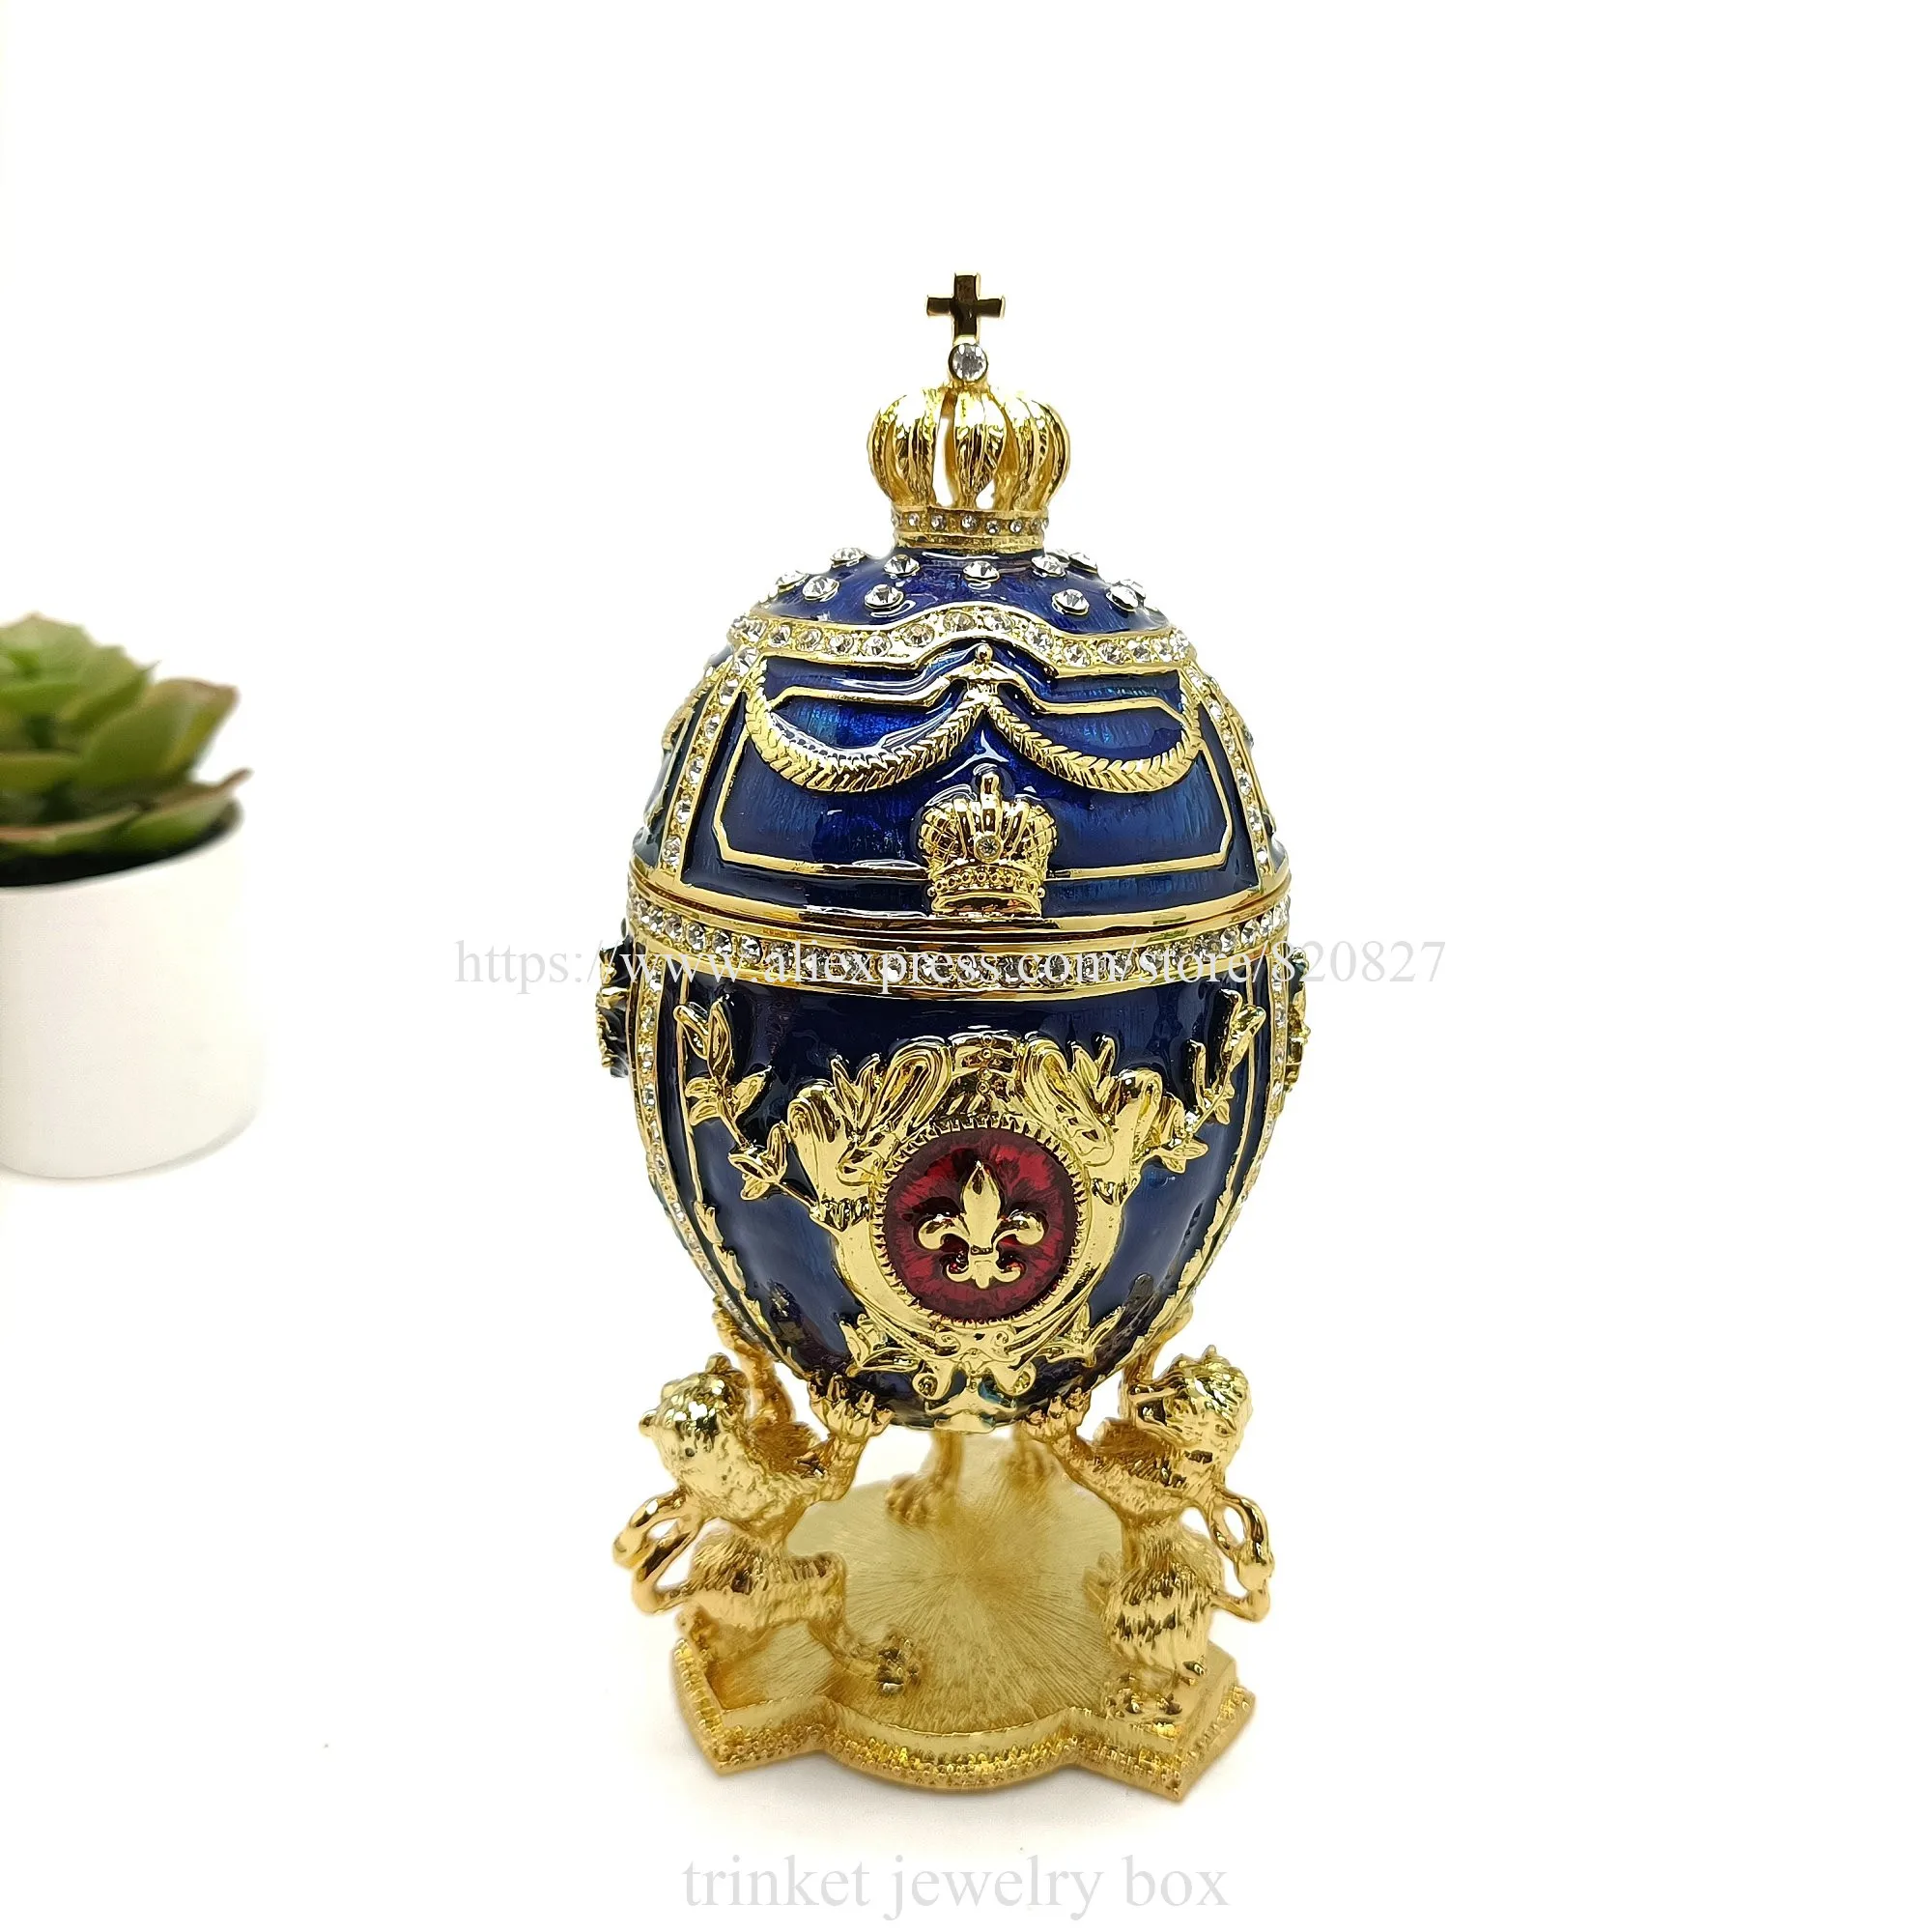 Russian Faberge Egg Trinket Box Hinged Jewelry Box Hand Painted Enameled Faberge Egg Collectibles Gift with crystal